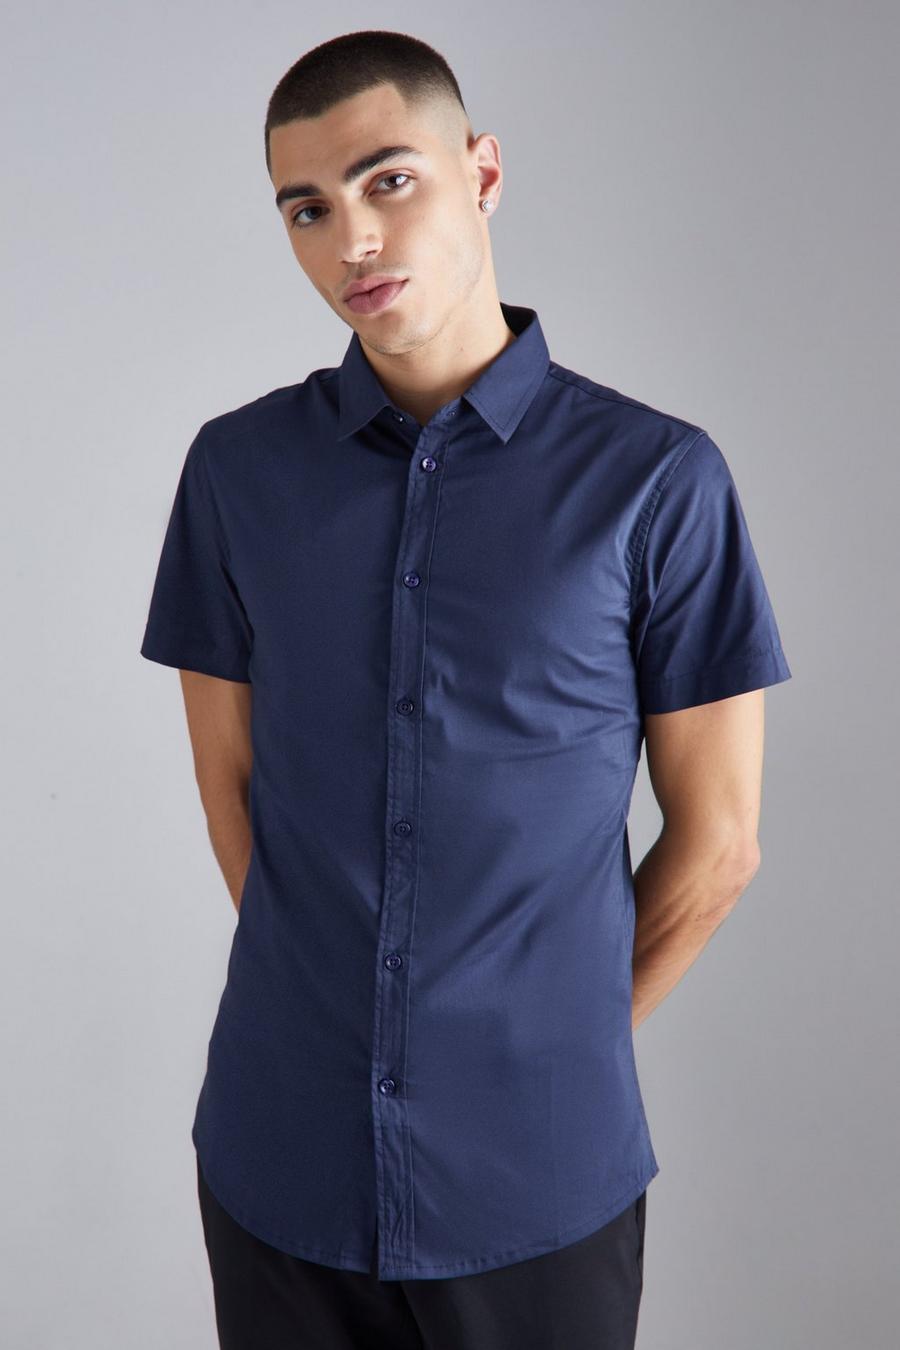 Navy blu oltremare Short Sleeve Muscle Shirt